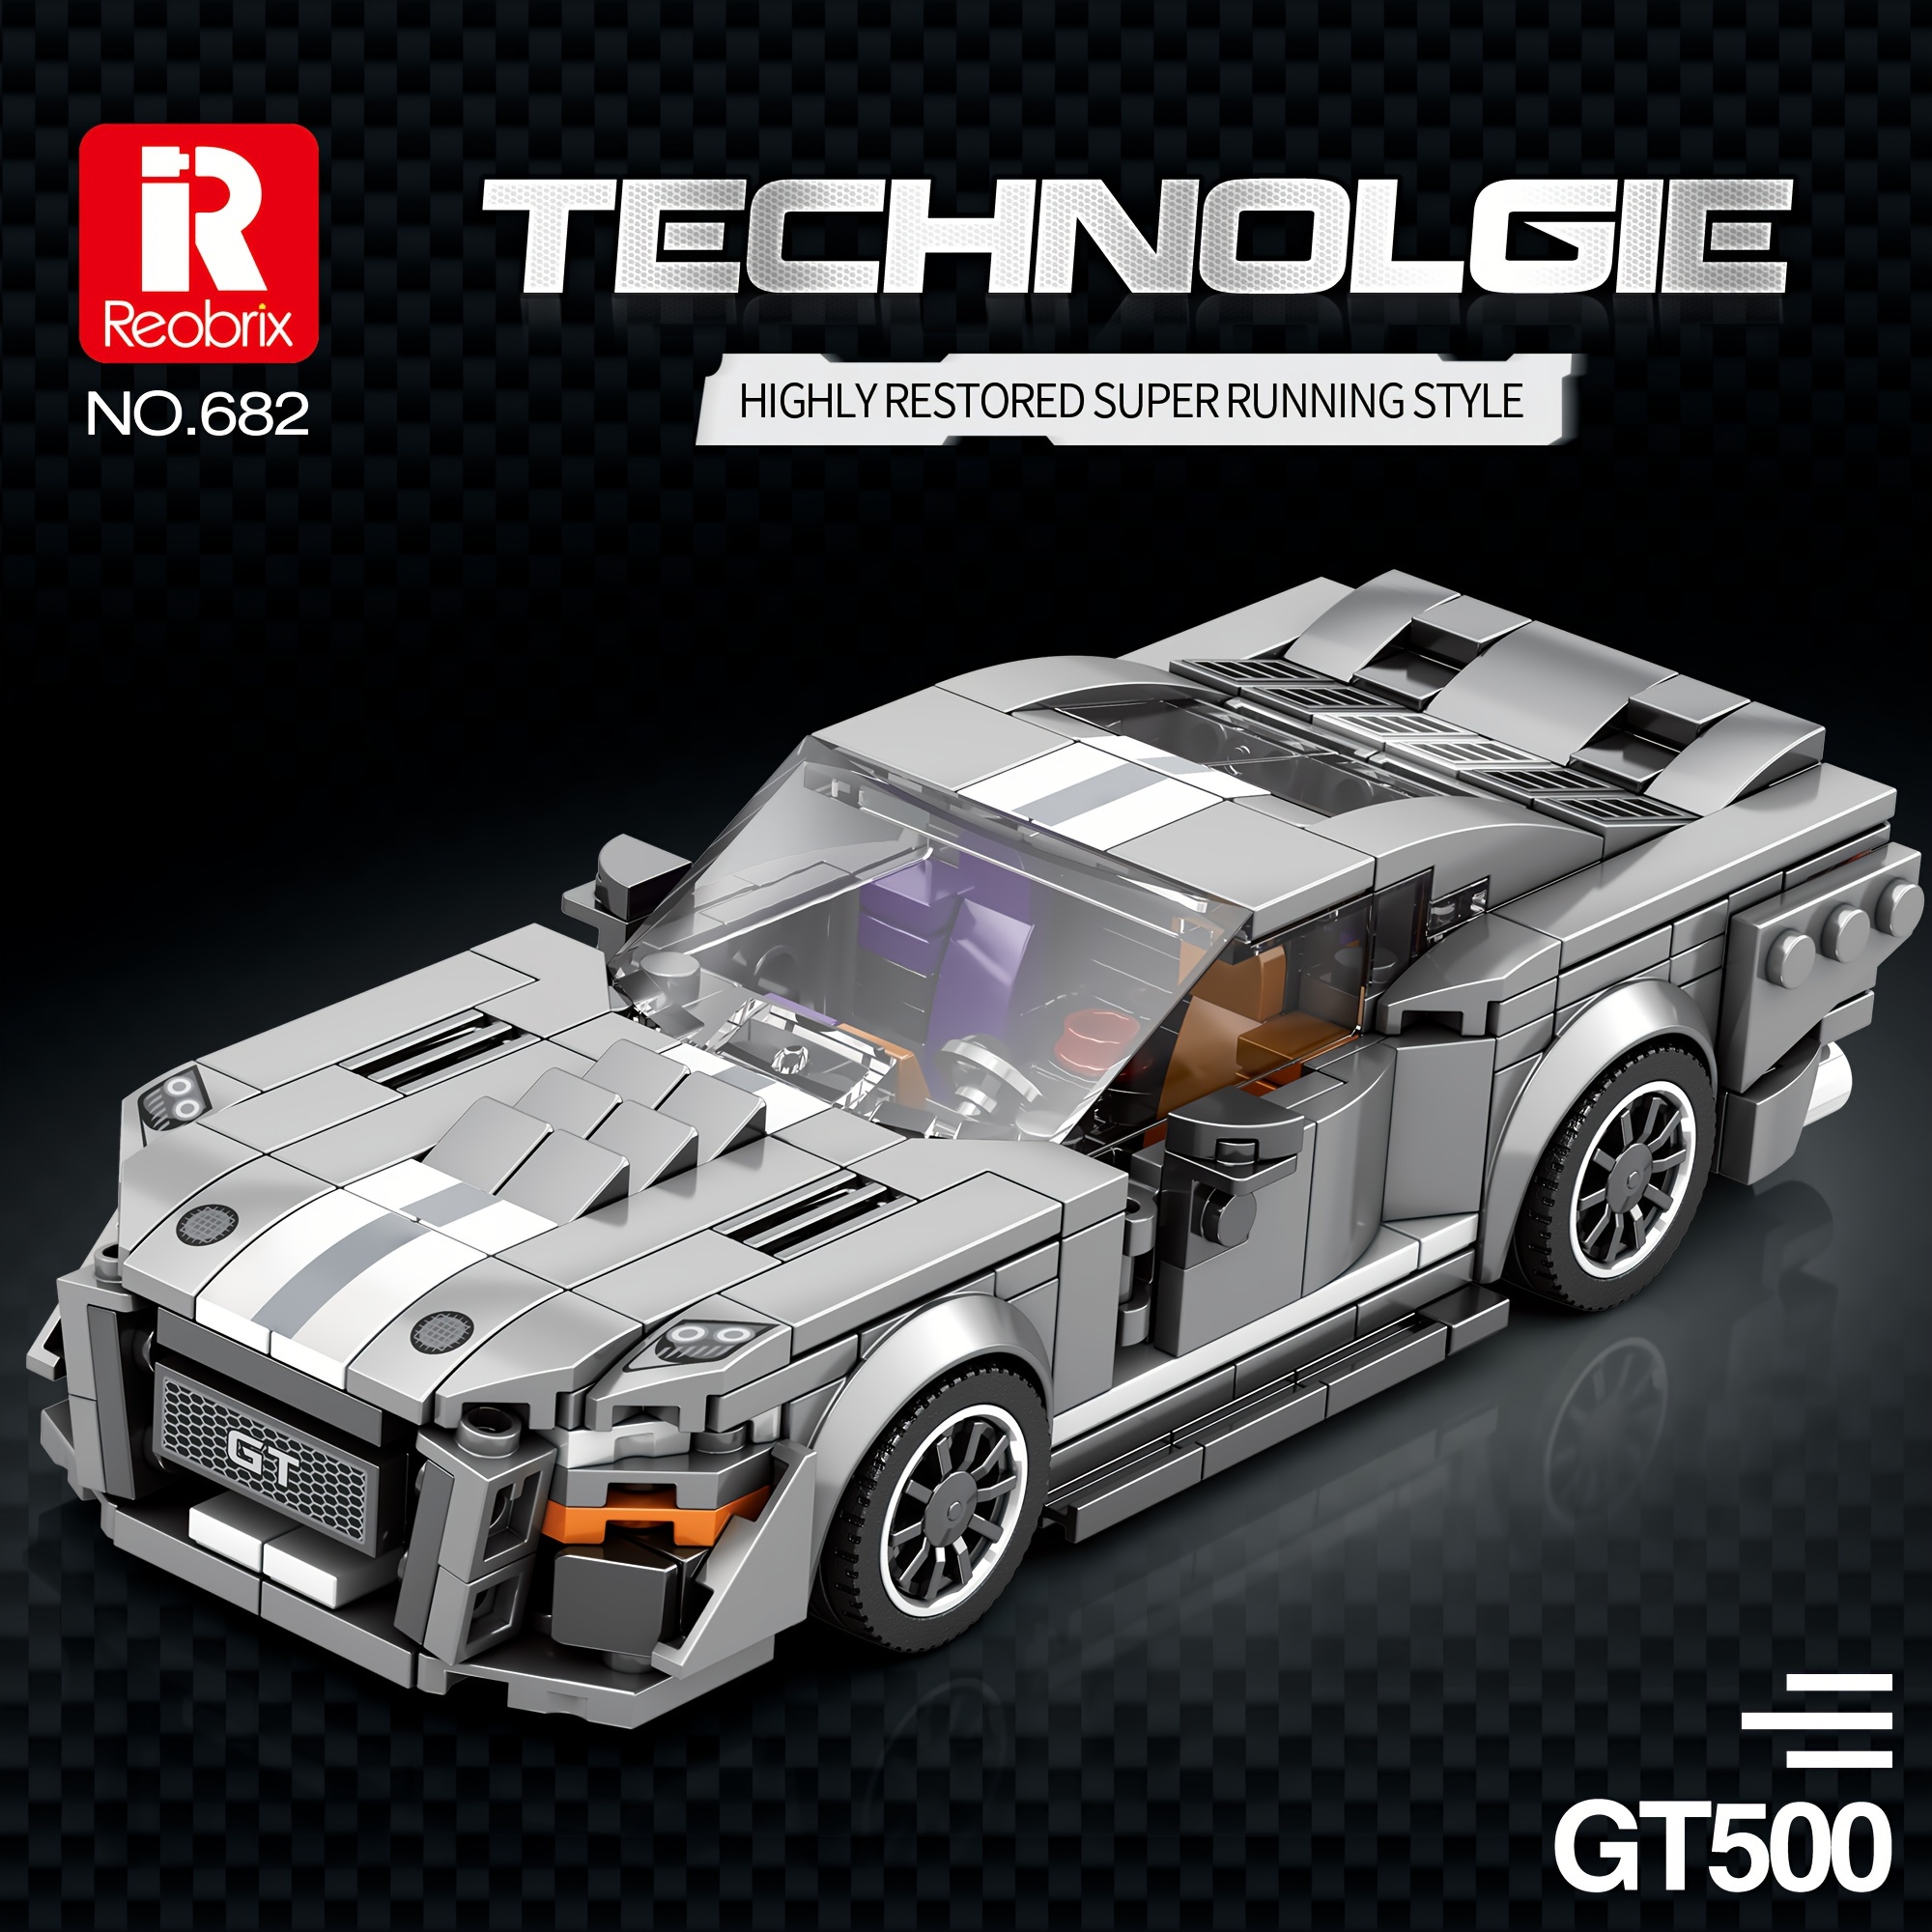 Technicial Mini Eclipse Supercar Famous Vehicle Model with Box Compatible  with Lego Car Building Blocks Brick Toys Kids Gift Set - AliExpress